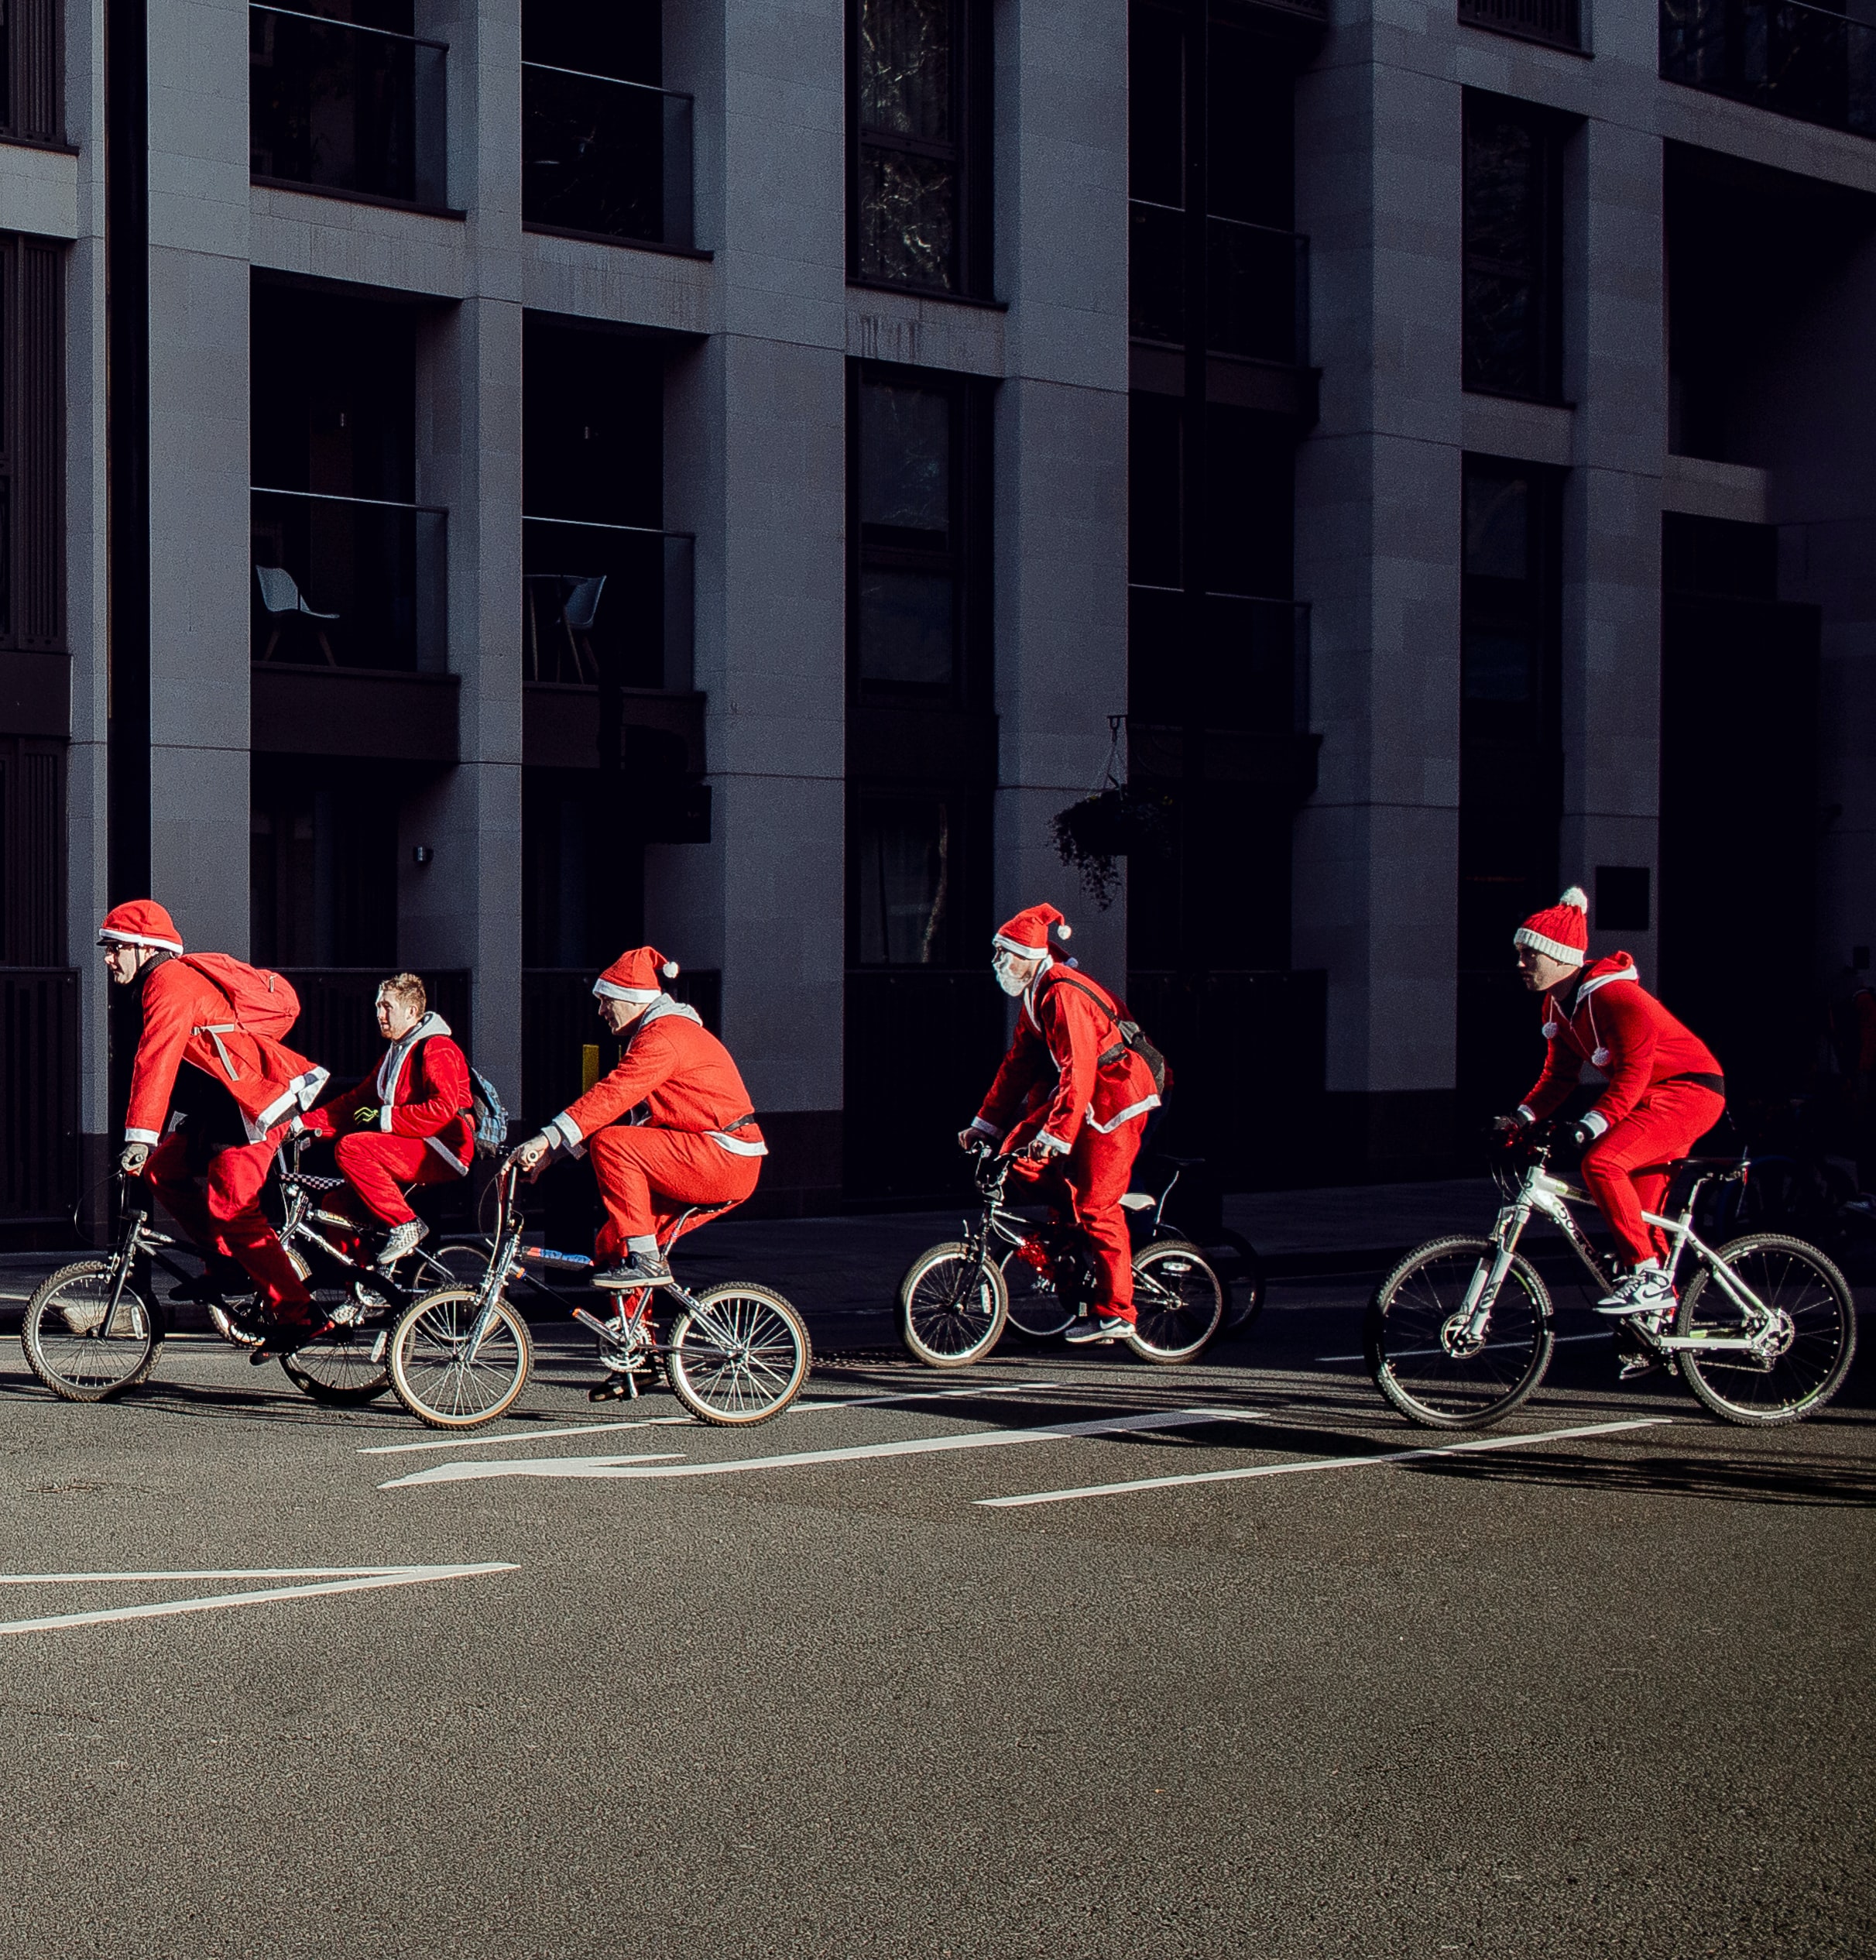 How to maximise your riding over Christmas